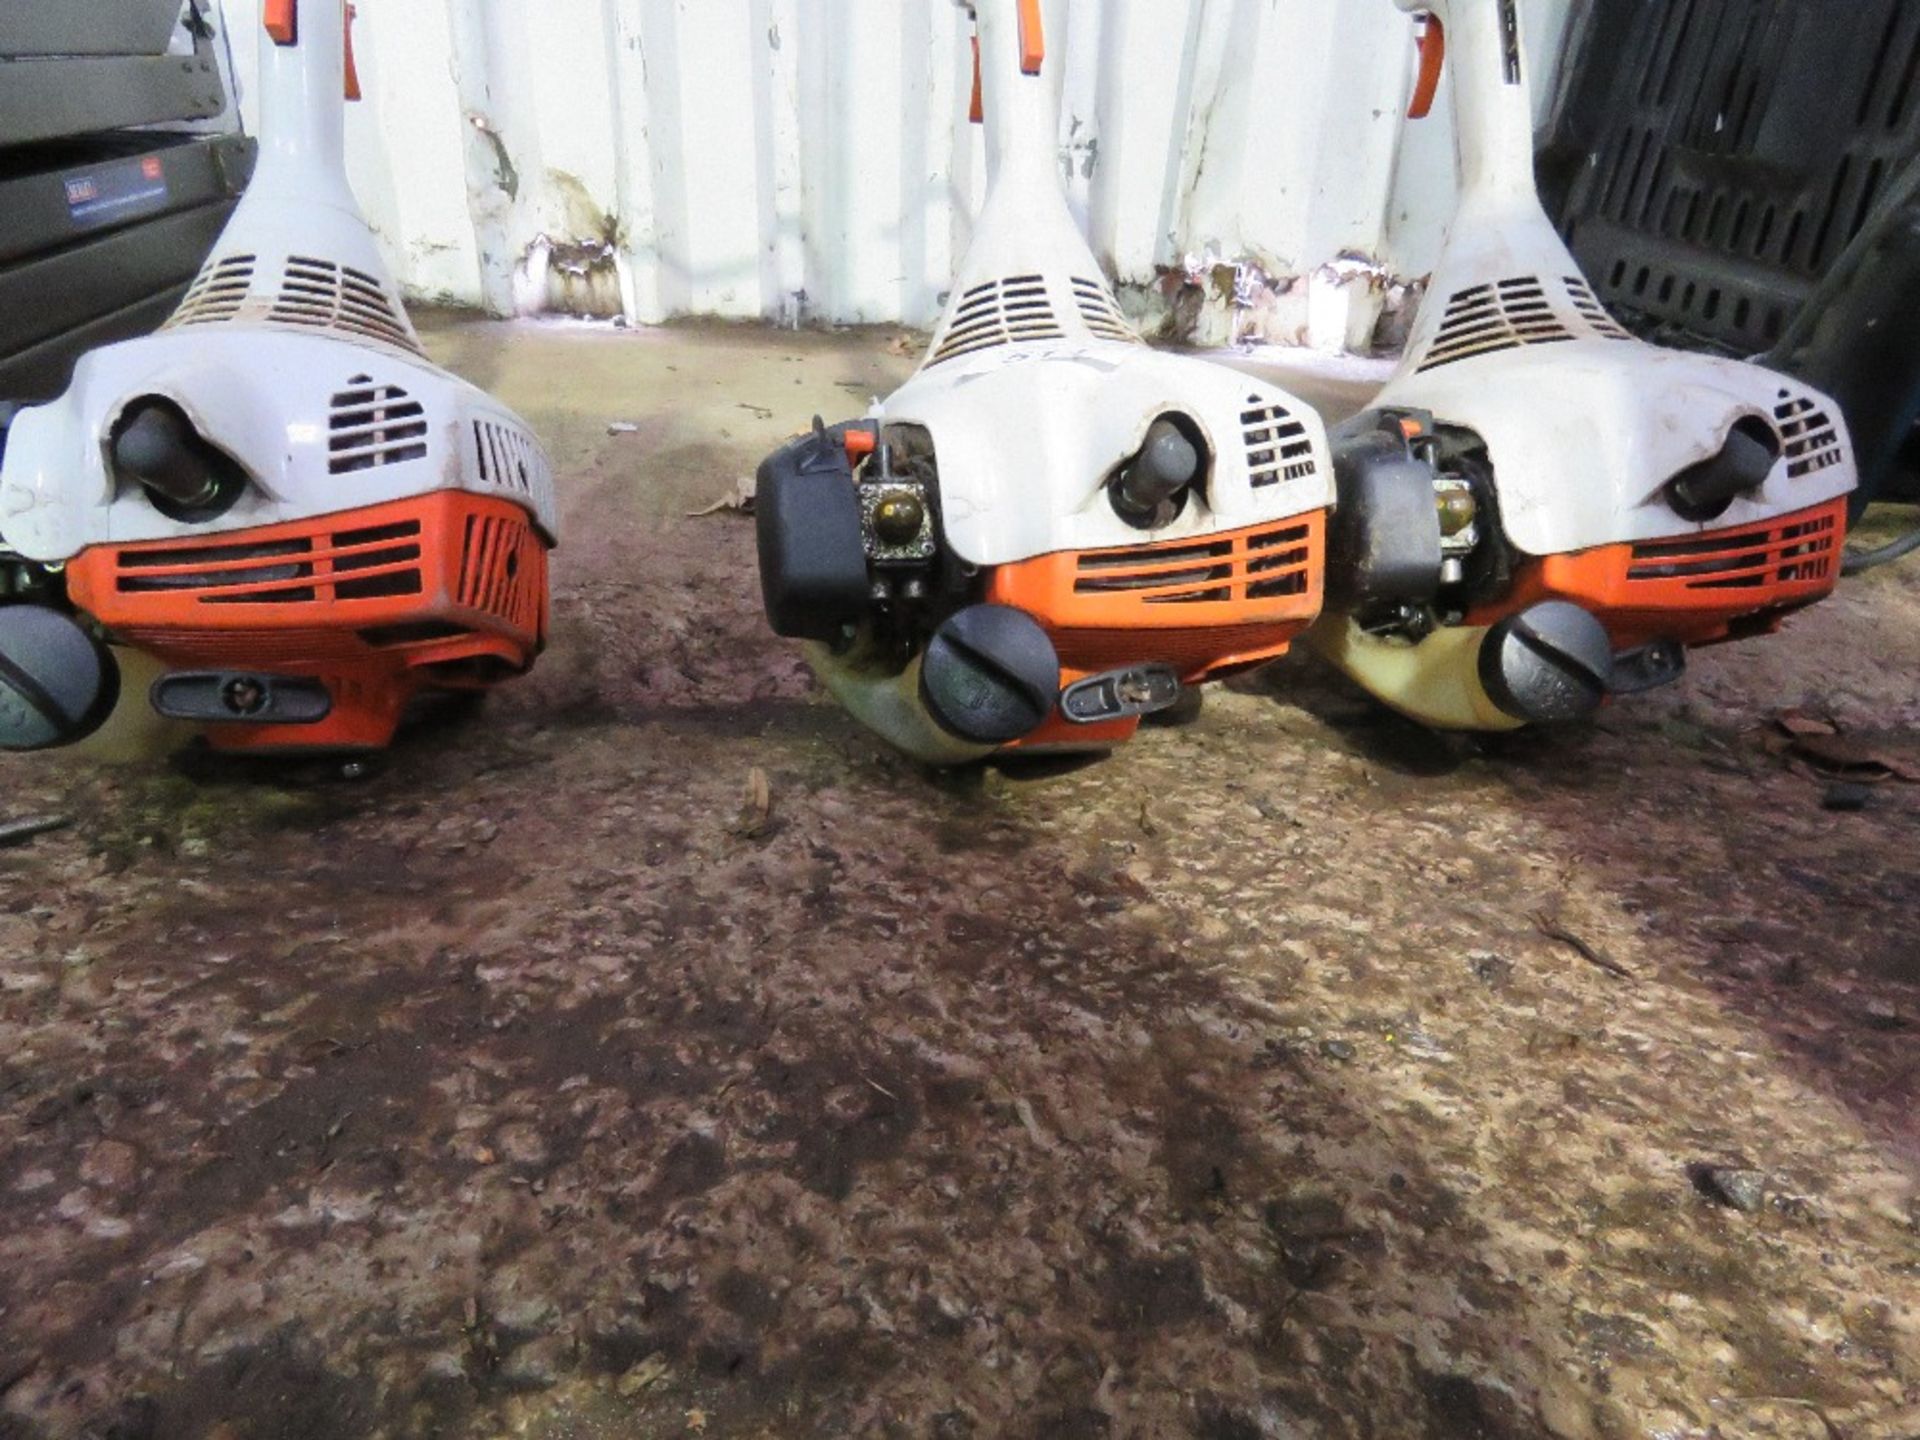 3 X STIHL PETROL ENGINED STRIMMERS. - Image 5 of 5